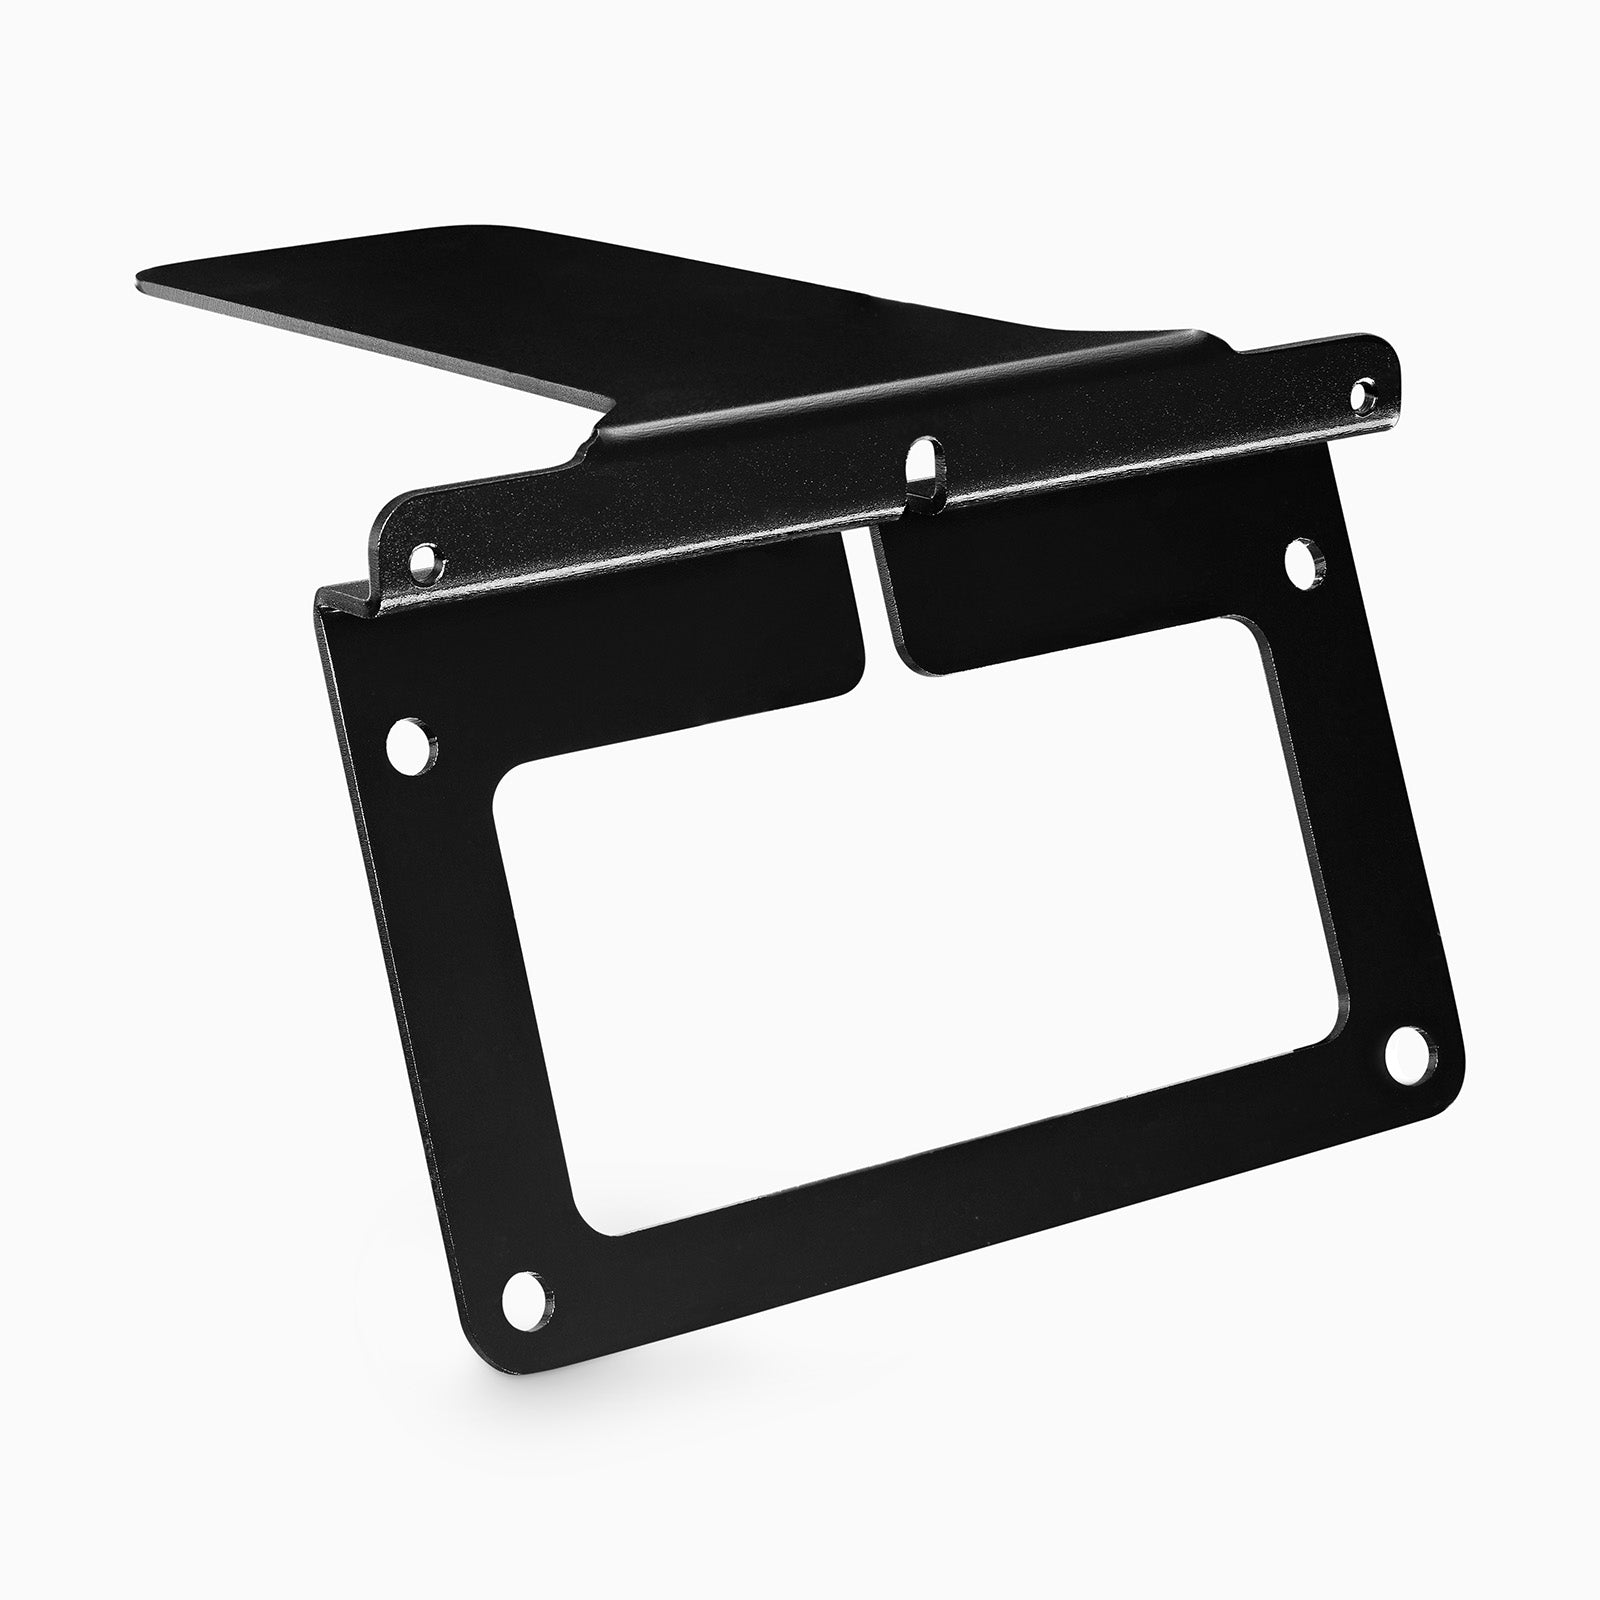 mo.rear license plate holder universal